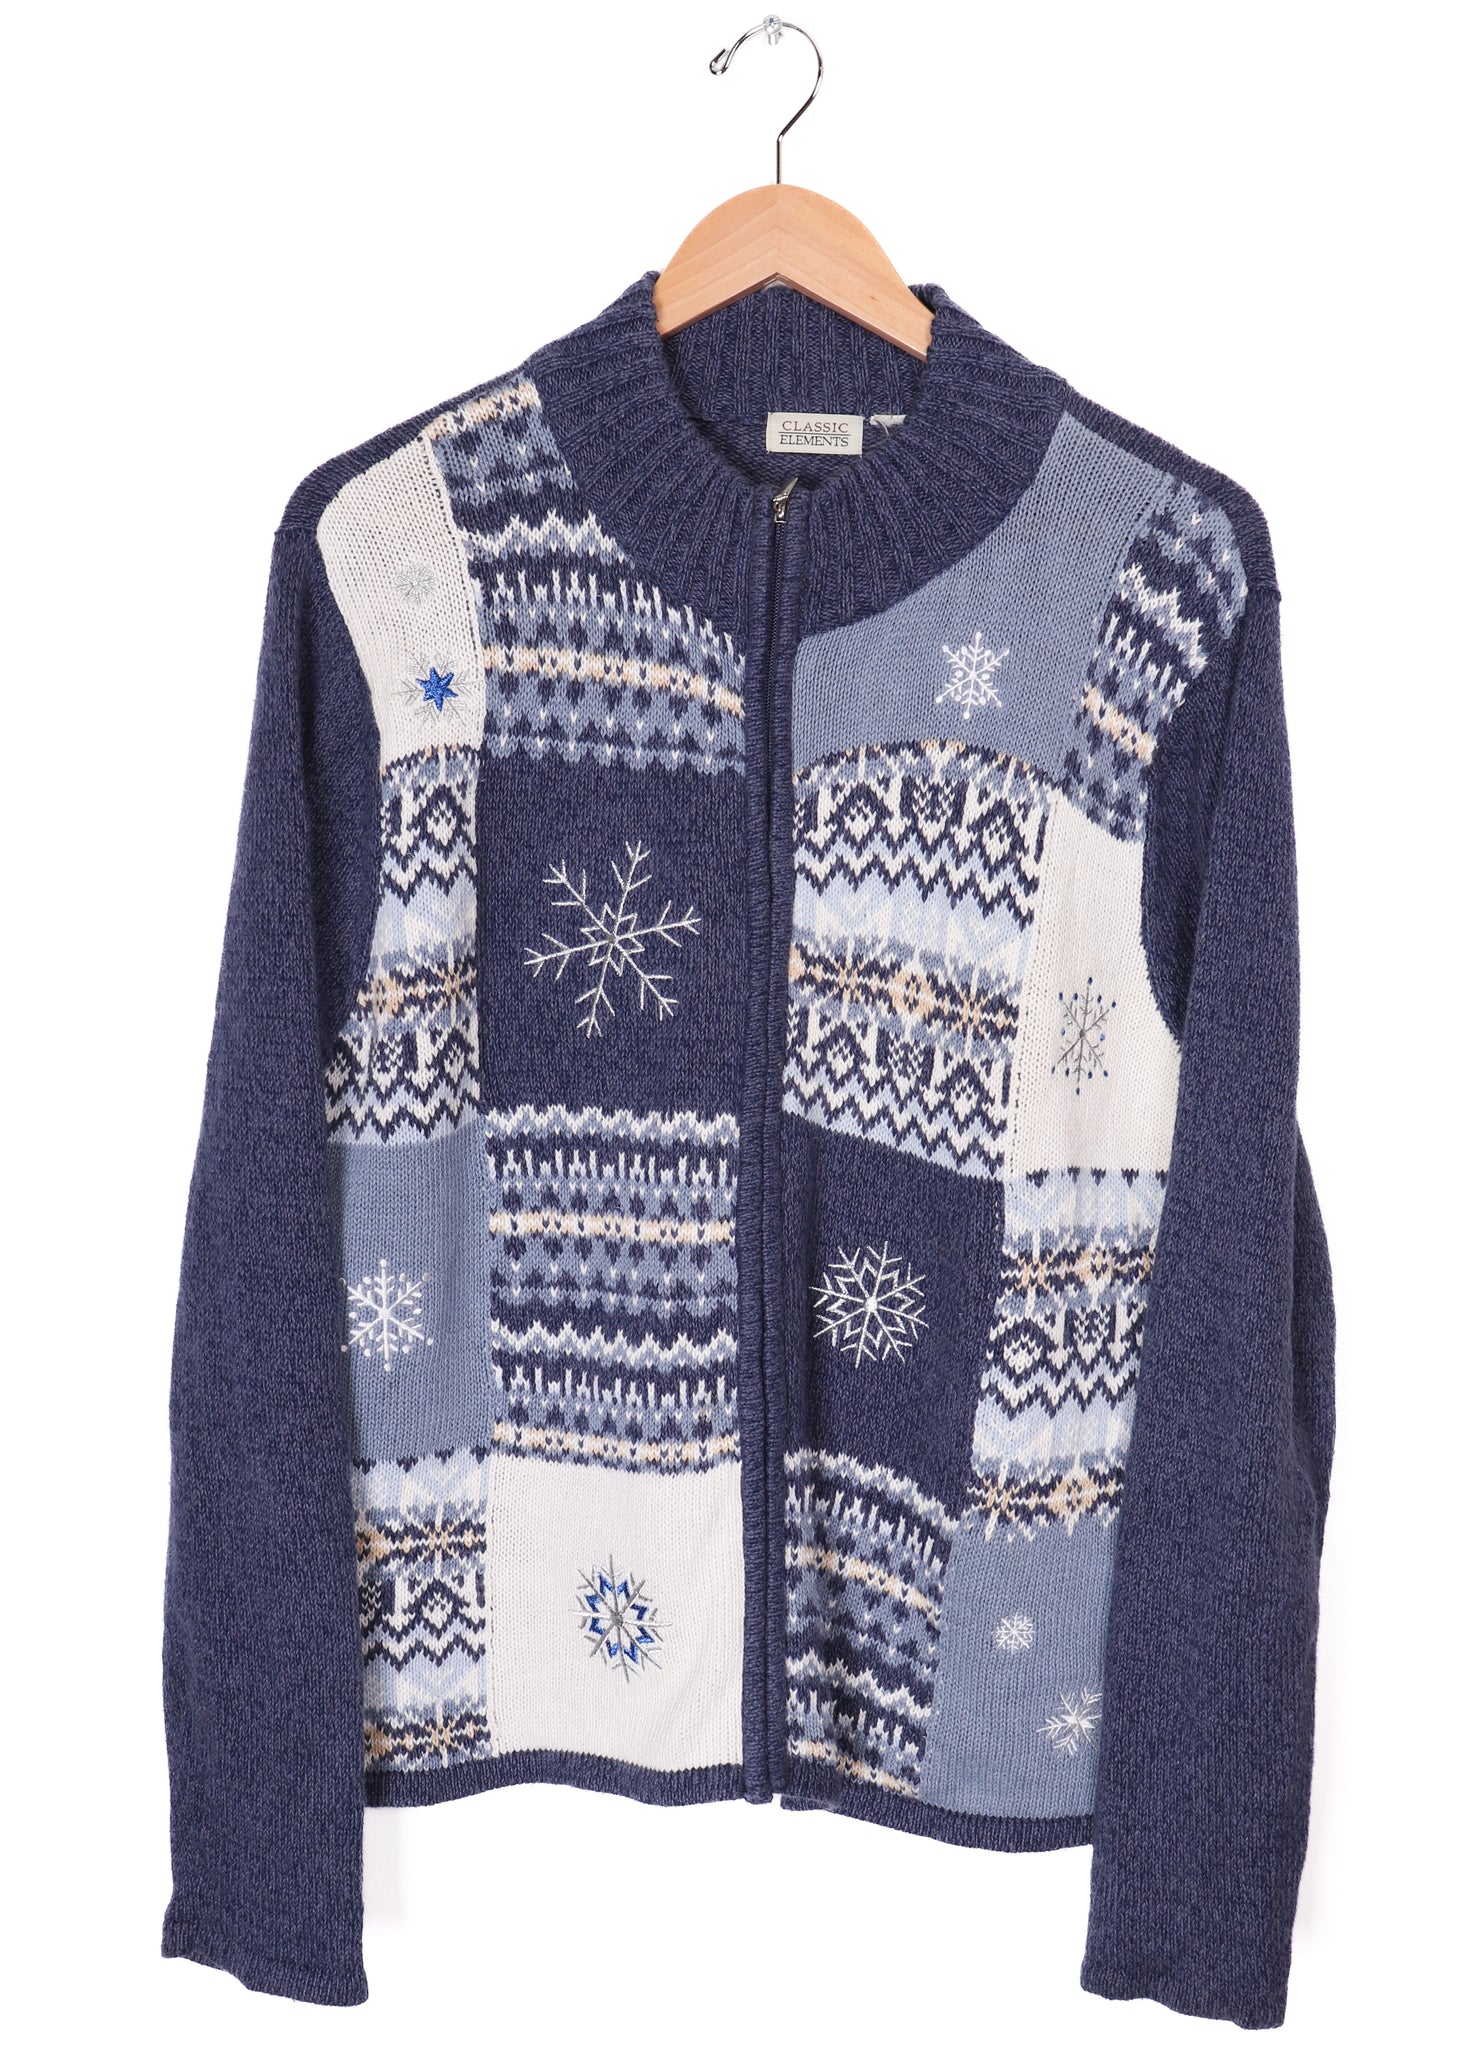 Classic Elements Christmas Plaid Blue Zip-Up Sweater